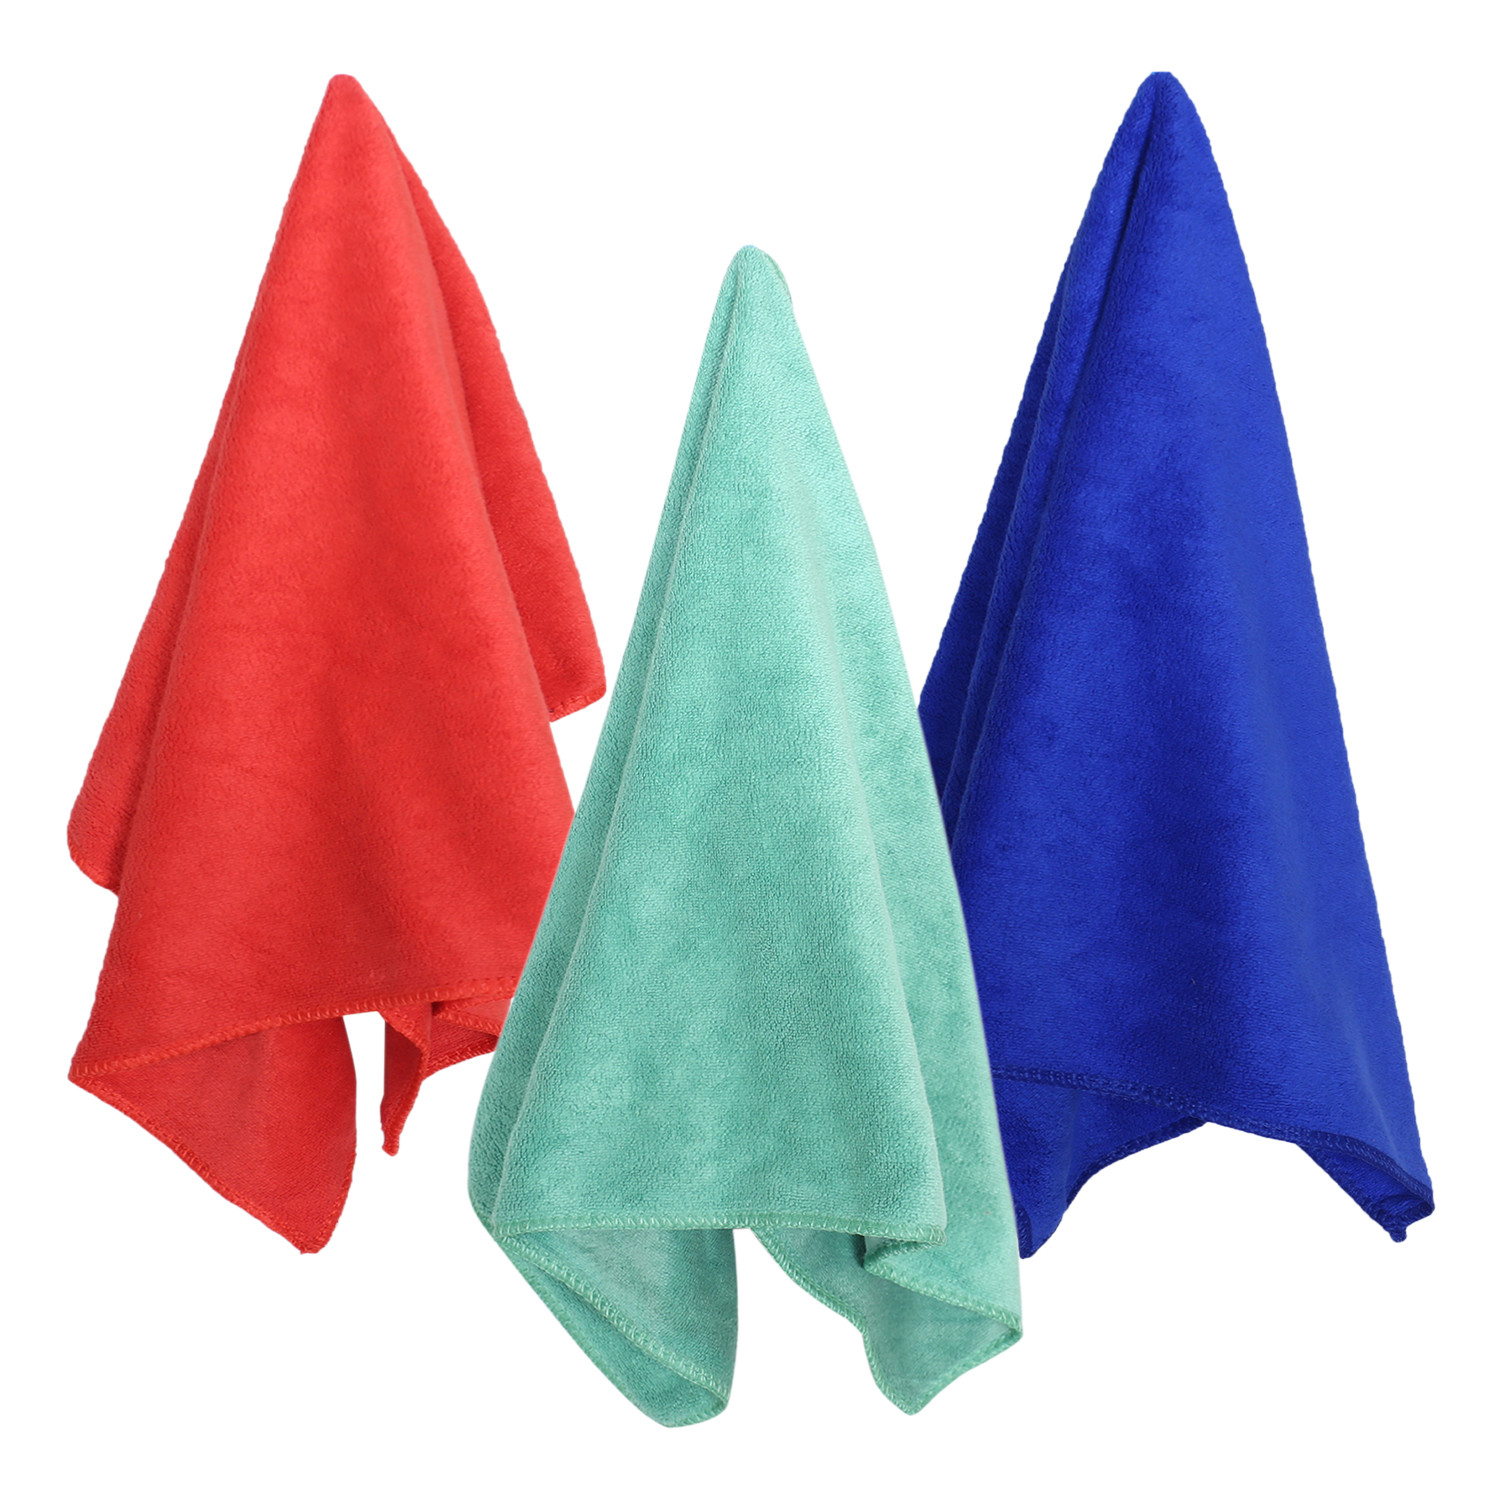 Kuber Industries Cleaning Cloths|Microfiber Highly Absorbent Wash Towels for Kitchen,Car,Window,24 x 16 Inch,Pack of 3 (Green,Blue & Red)